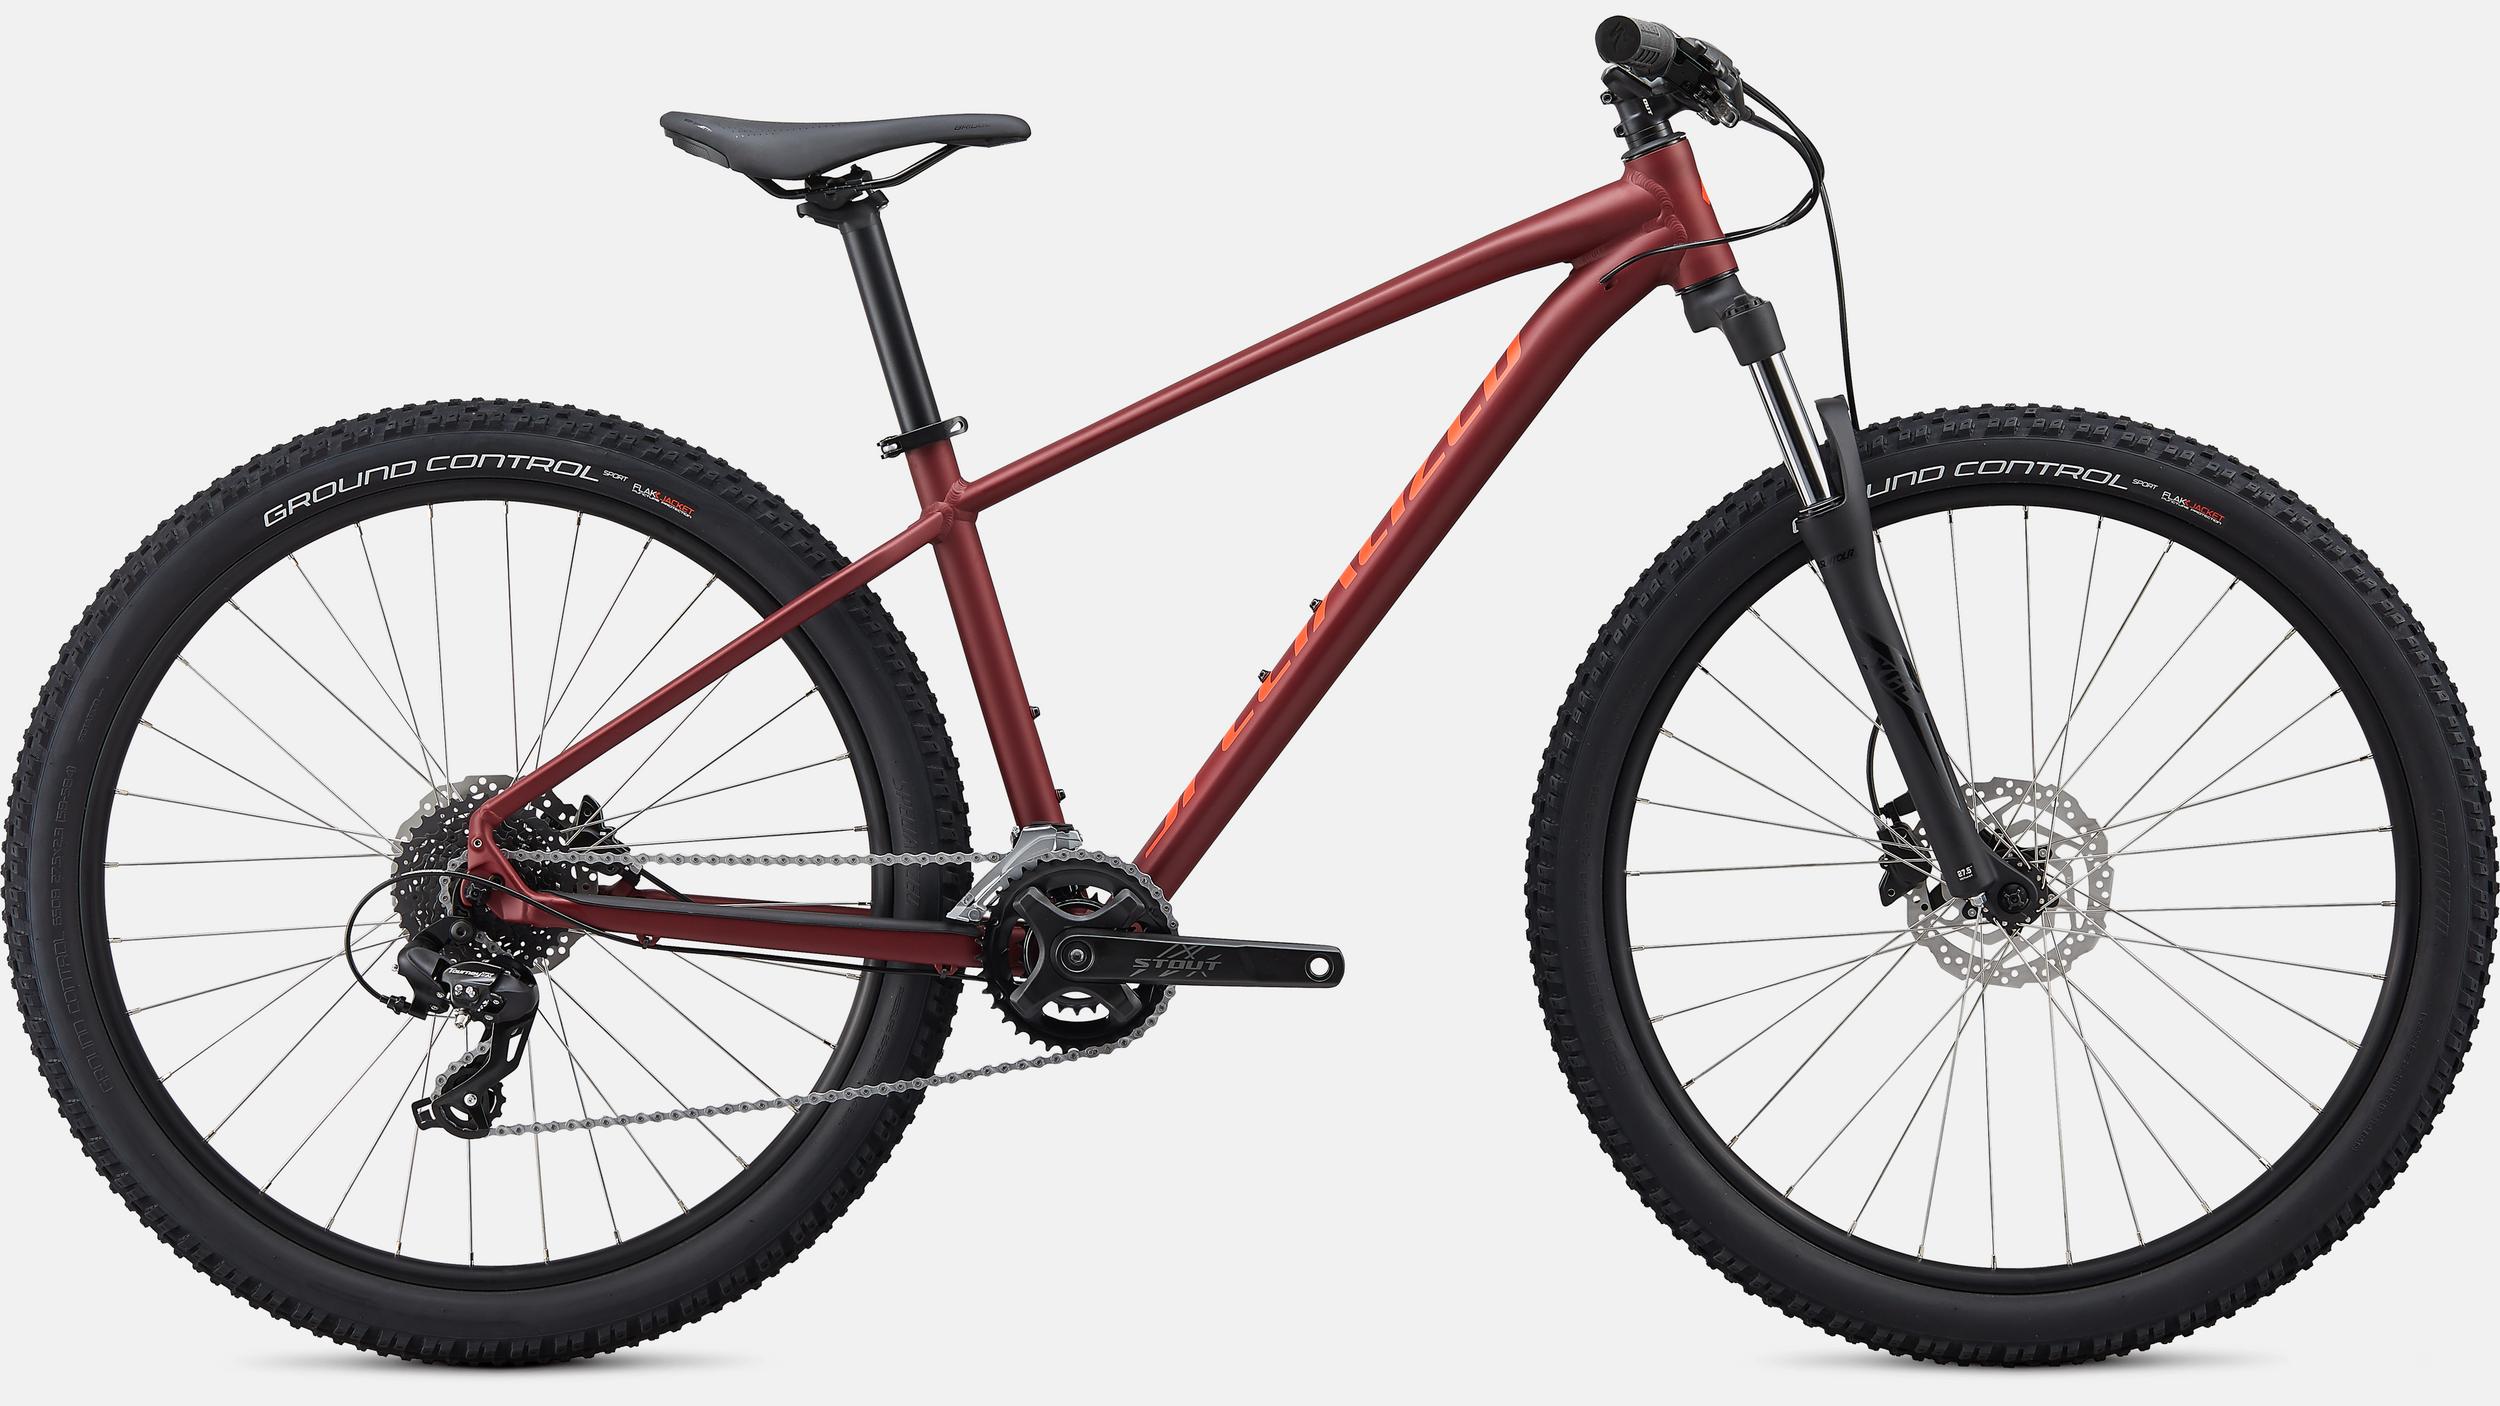 Paint for 2020 Specialized Pitch 27.5 - Satin Metallic Crimson